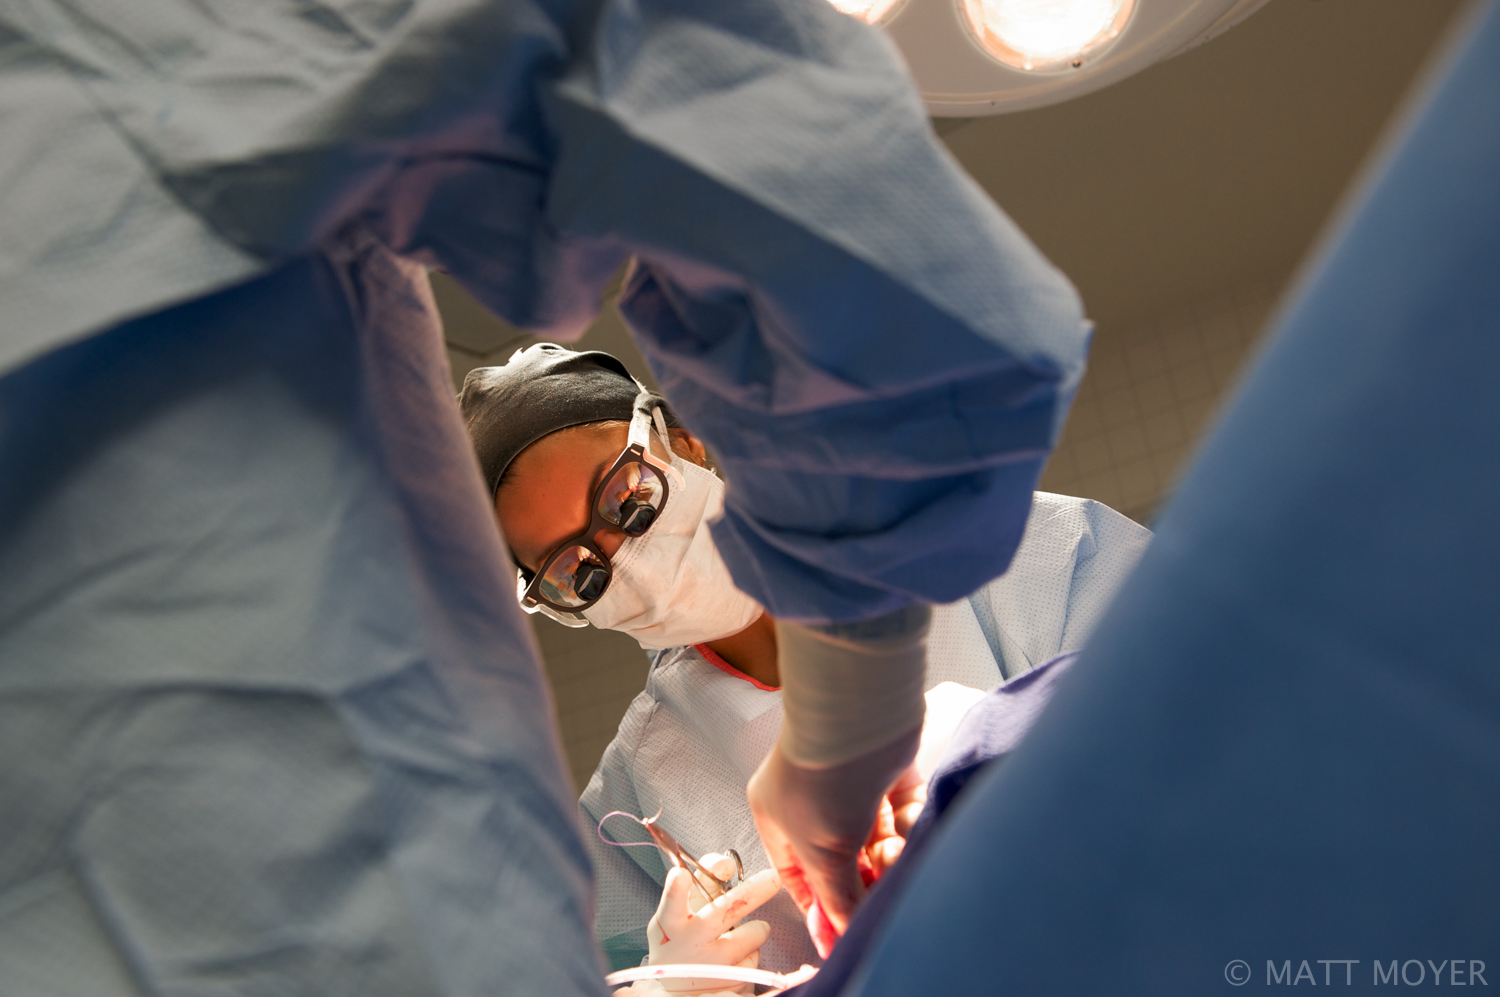  Dr. Carla Haack, left, a twenty five-year-old surgical resident, performs a surgery at Grady Memorial Hospital. 